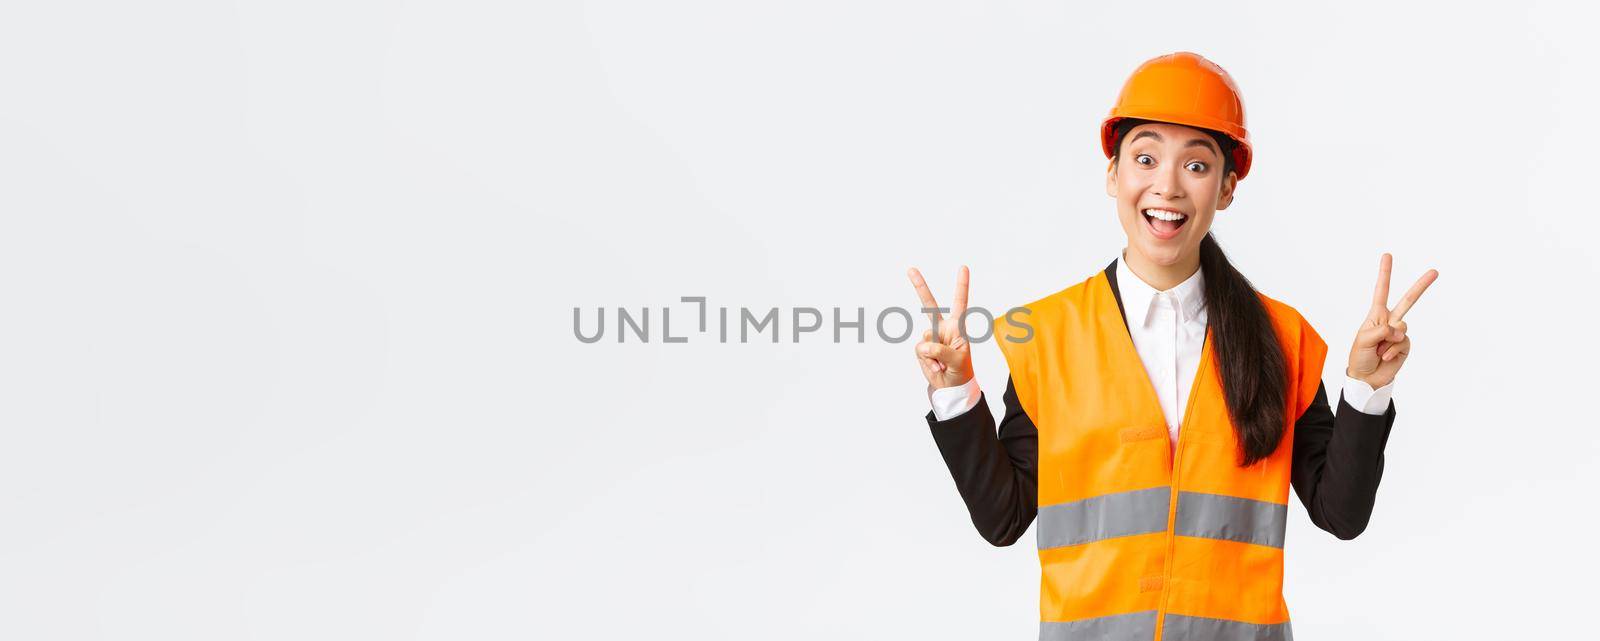 Happy smiling asian female engineer, architect in safety clothins and helmet, showing peace kawaii sign and looking upbeat, company winning tender on construction and building, white background.